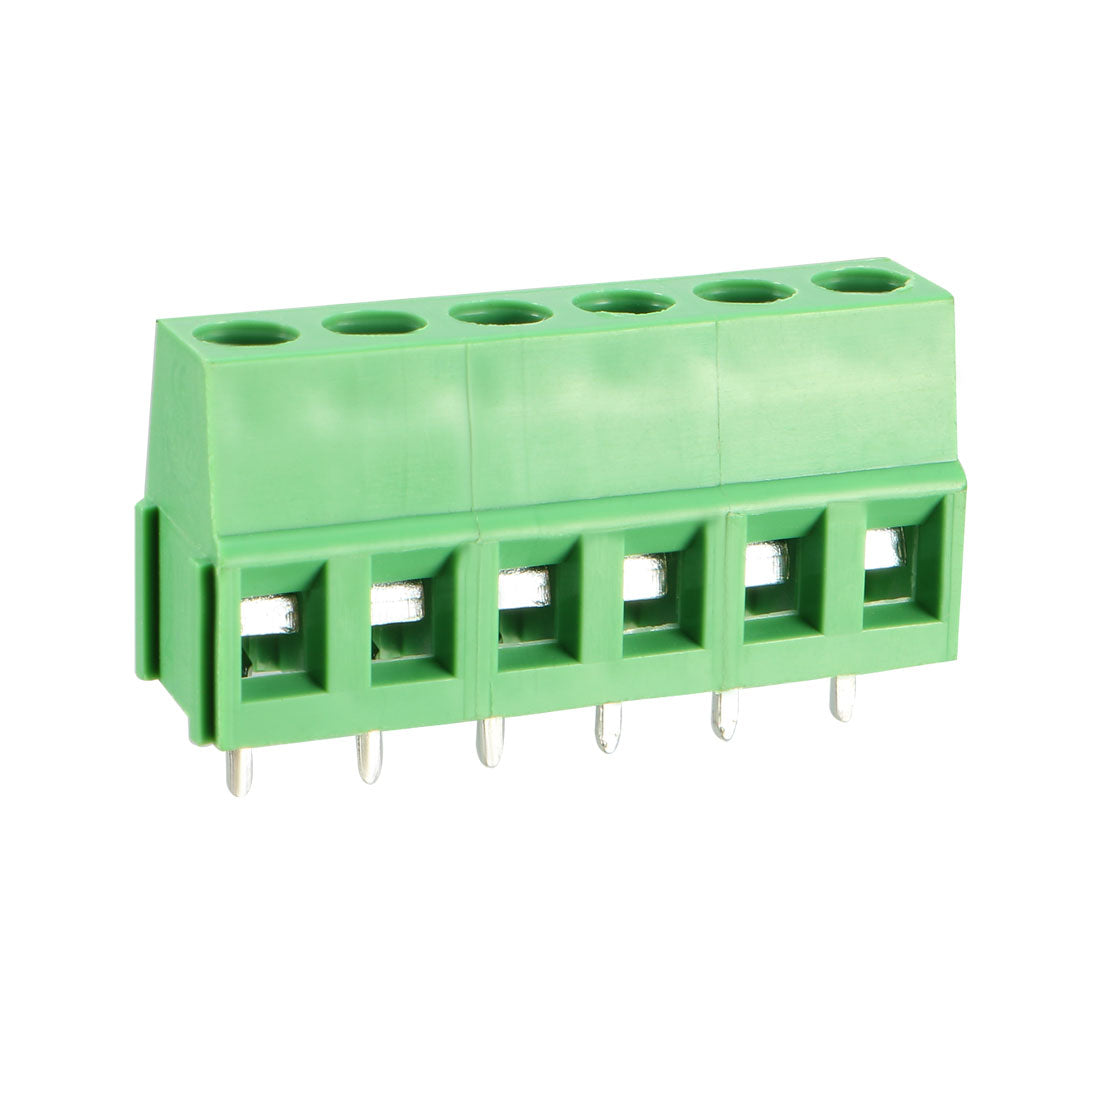 uxcell Uxcell 25Pcs AC300V 10A 5mm Pitch 6P Needle Seat Insert-In PCB Terminal Block green